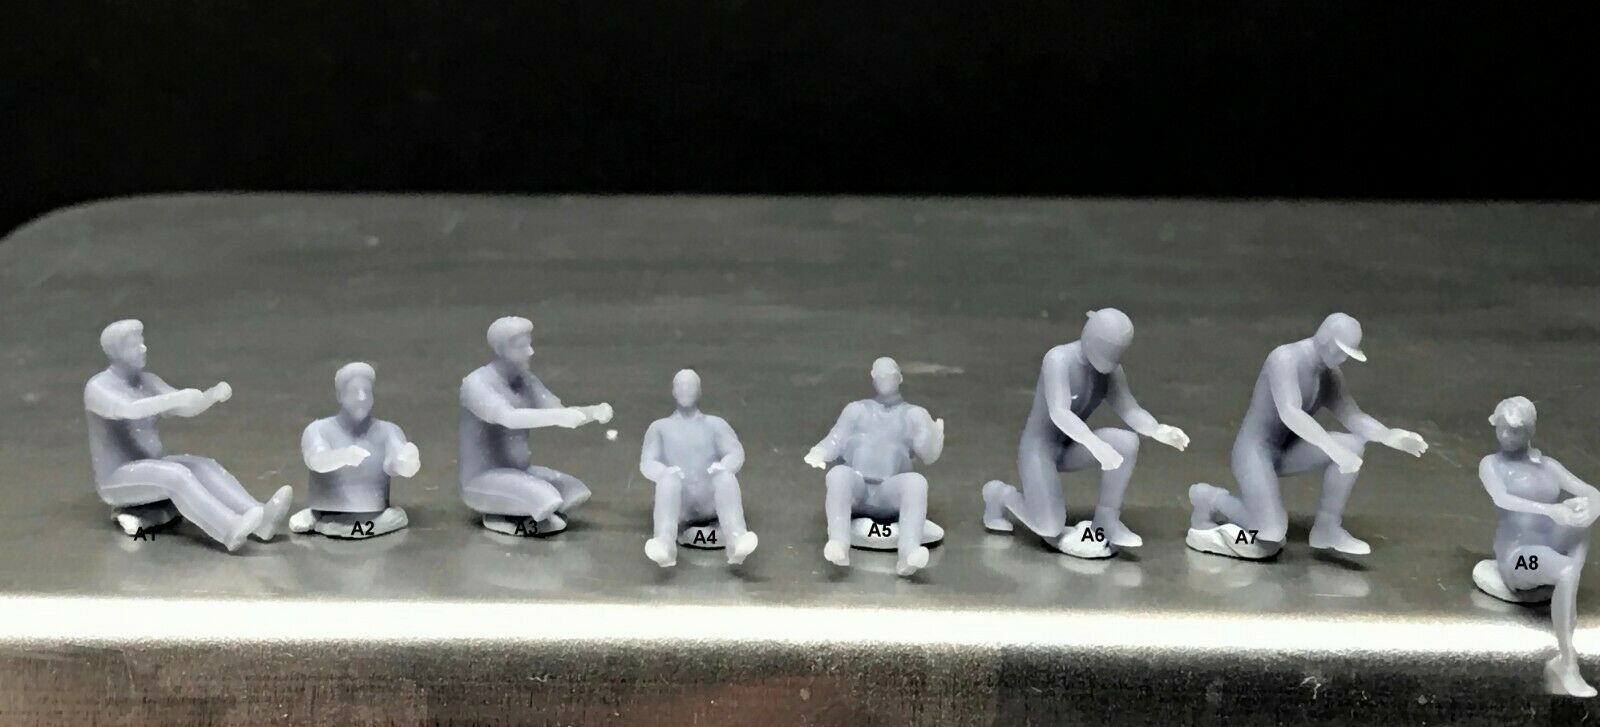 1:64 Scale Miniature People - Resin / Unpainted - Great For Dioramas #38 Figures